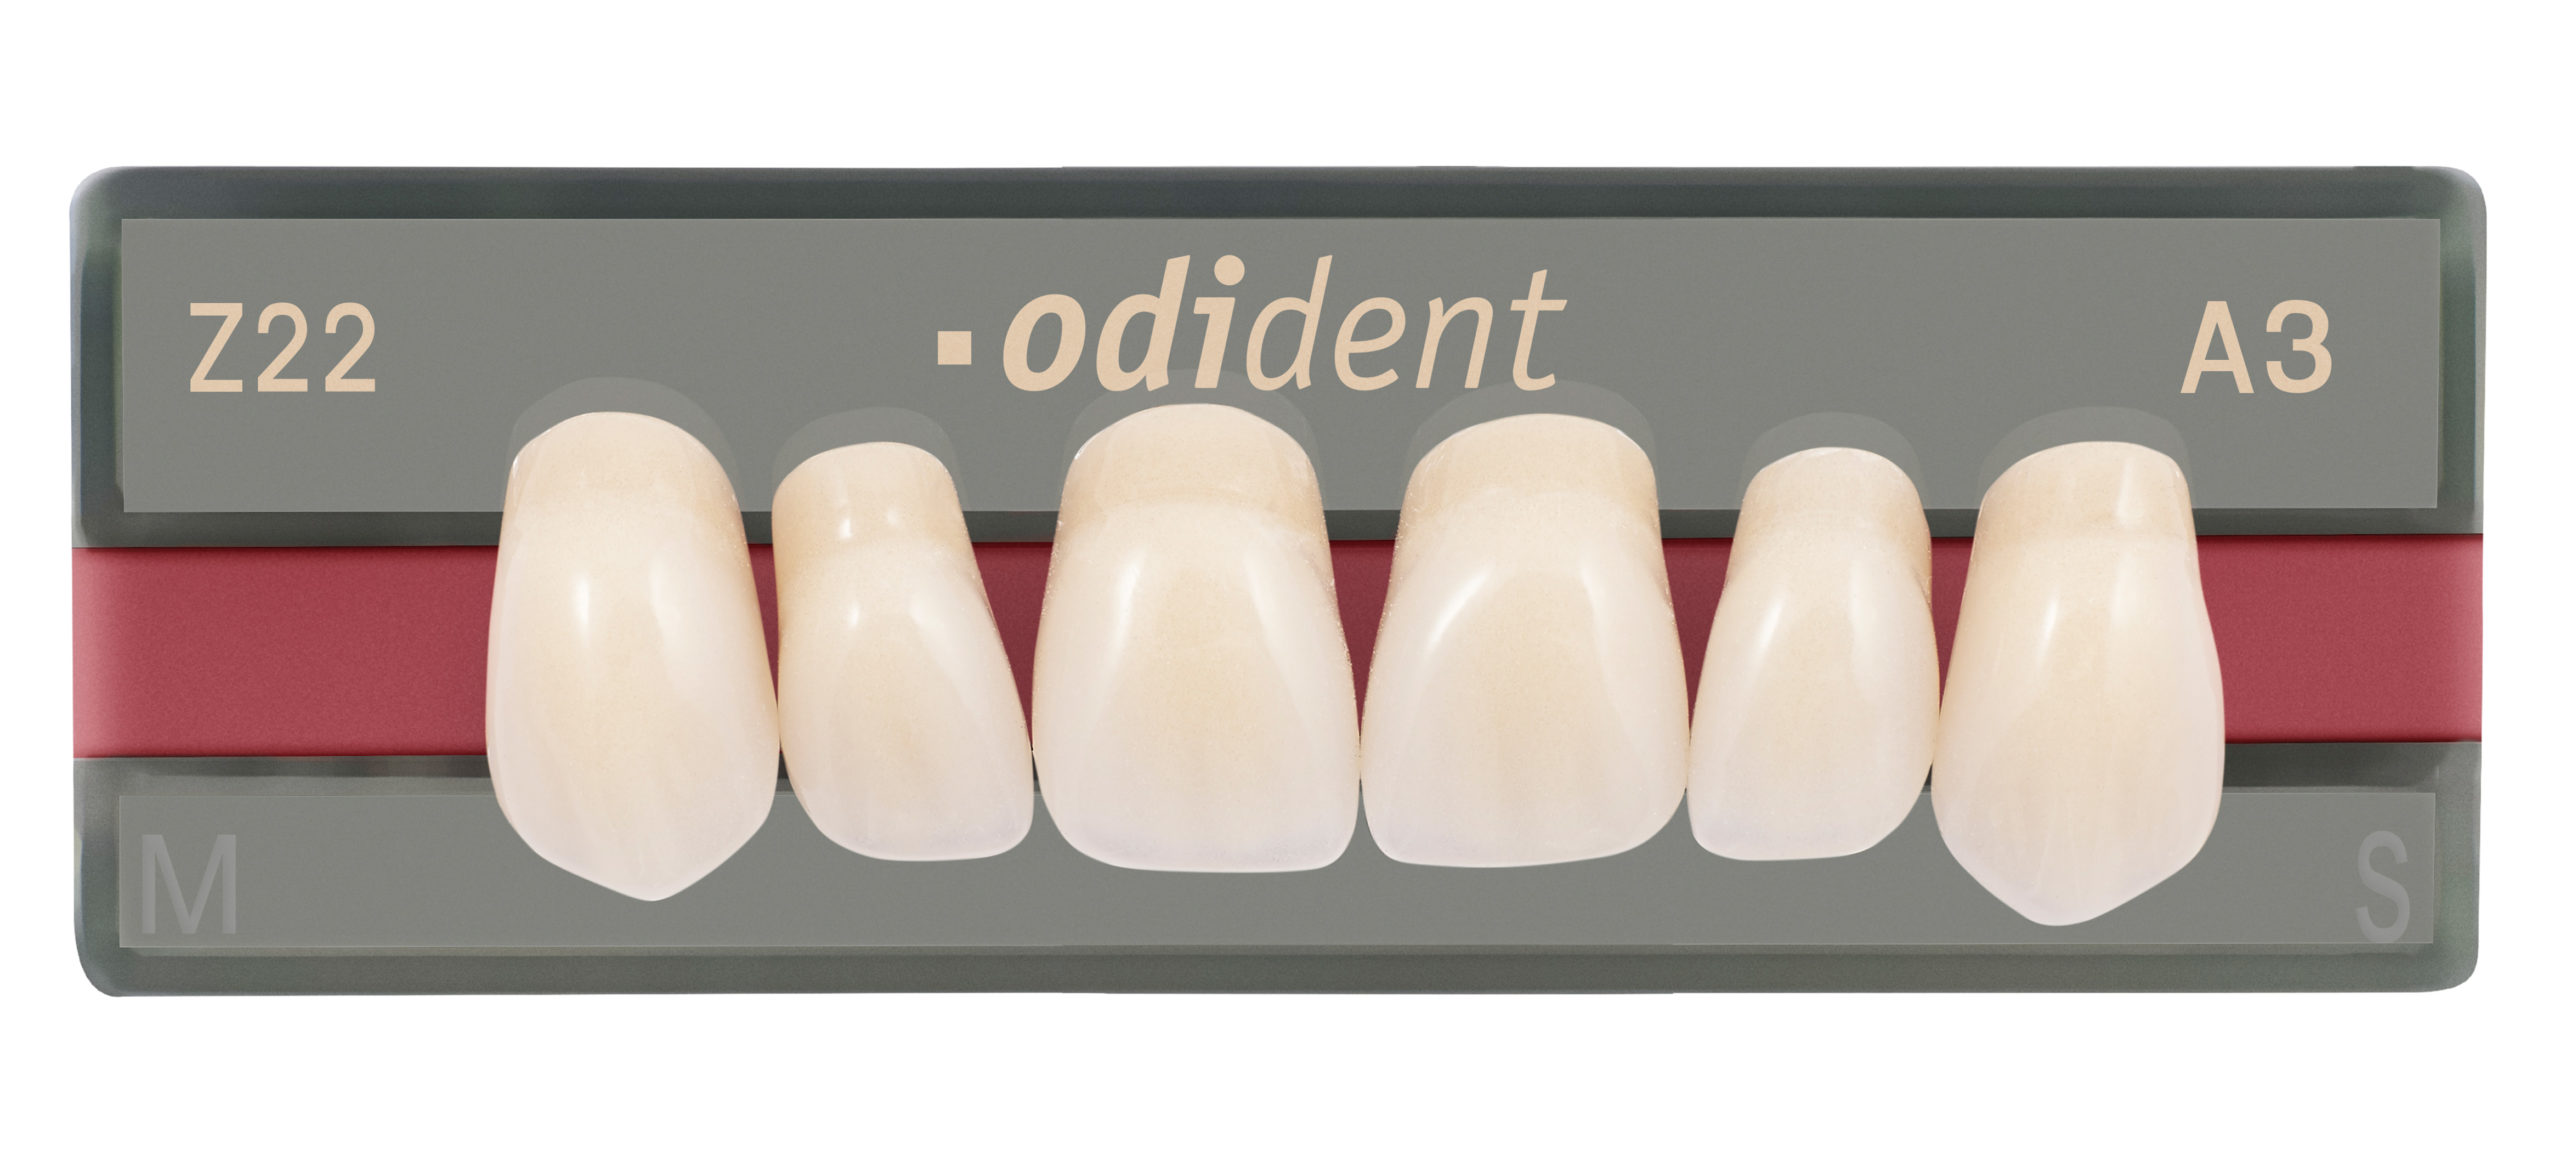 odident dientes artificiales